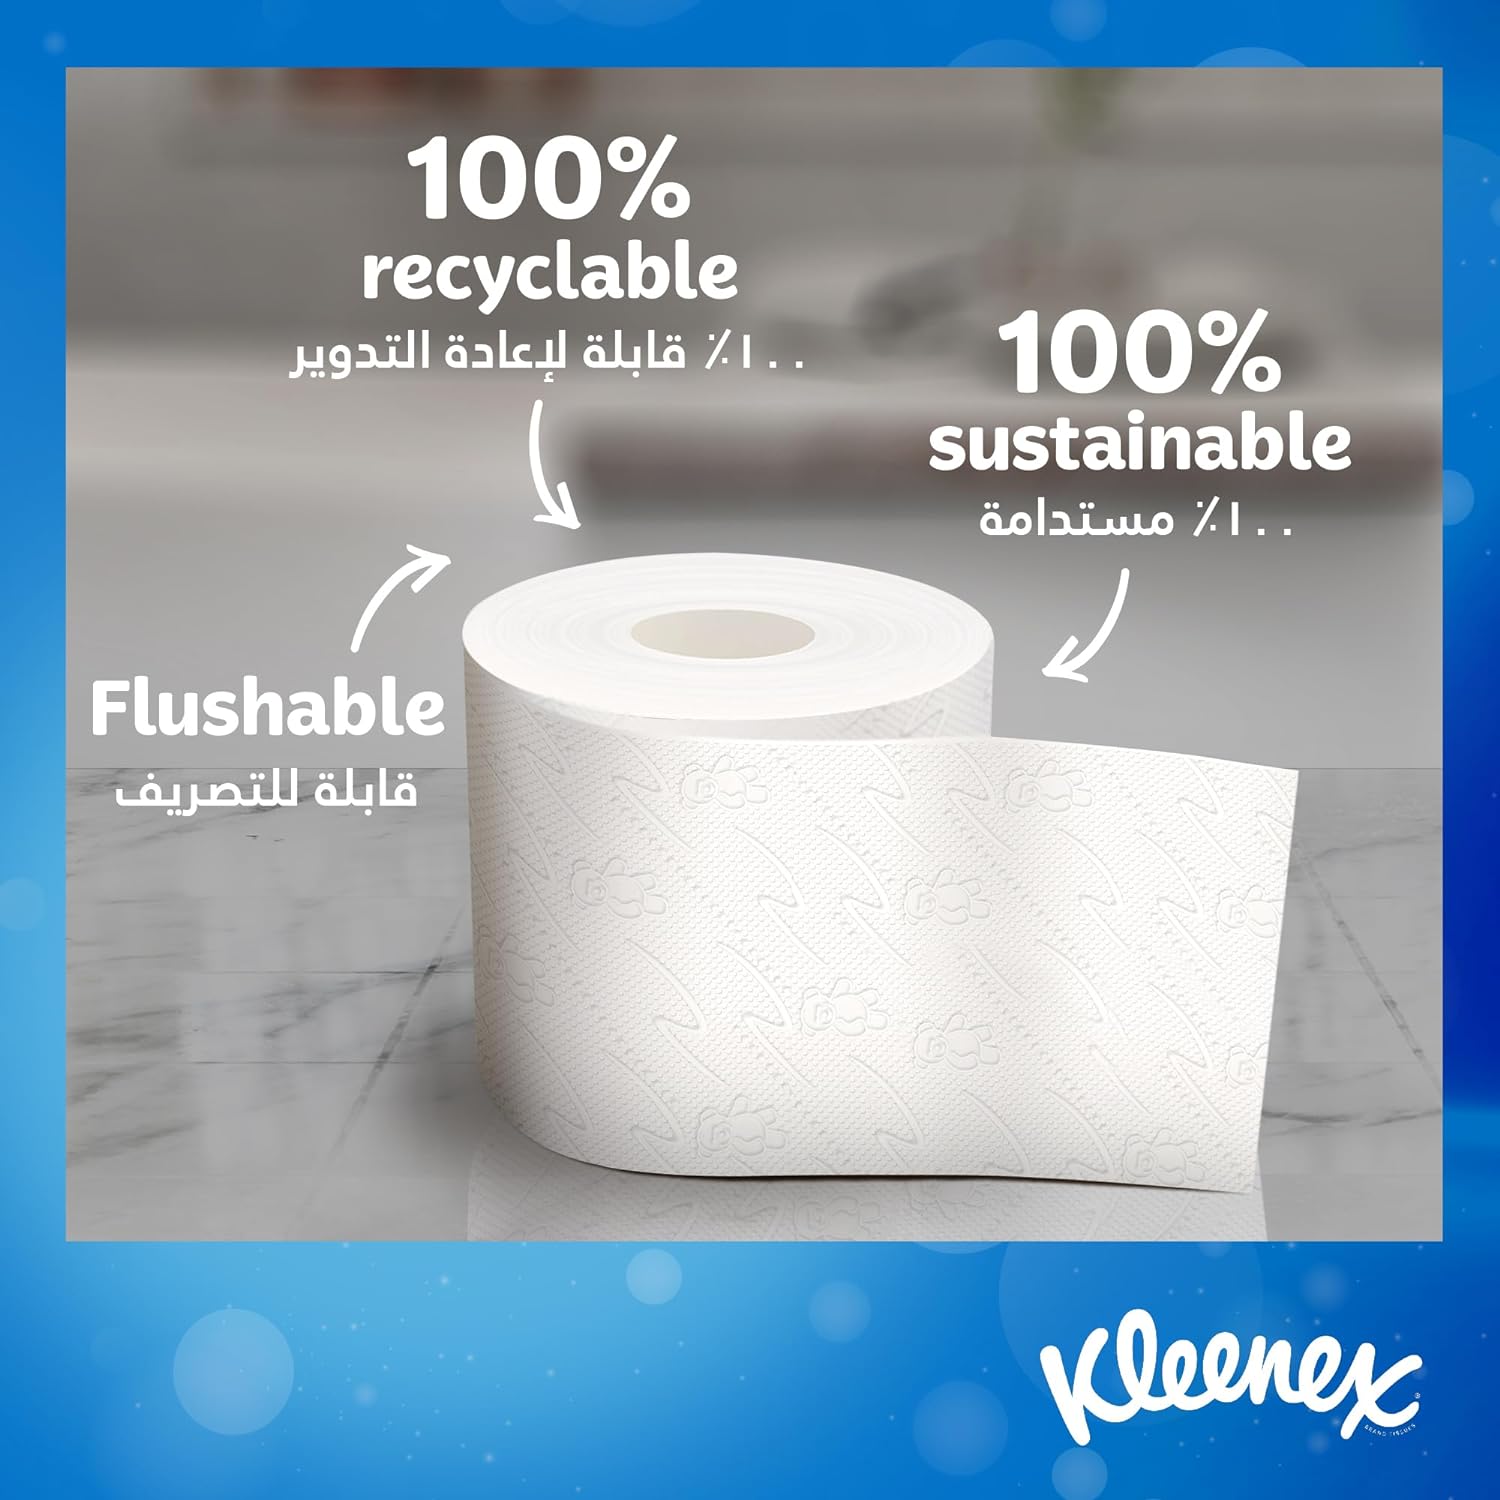 Kleenex Dry Soft Toilet Tissue Paper, 2 Ply, 72 Rolls X 200 Sheets, Embossed Bathroom Tissue With A Touch Of Cotton